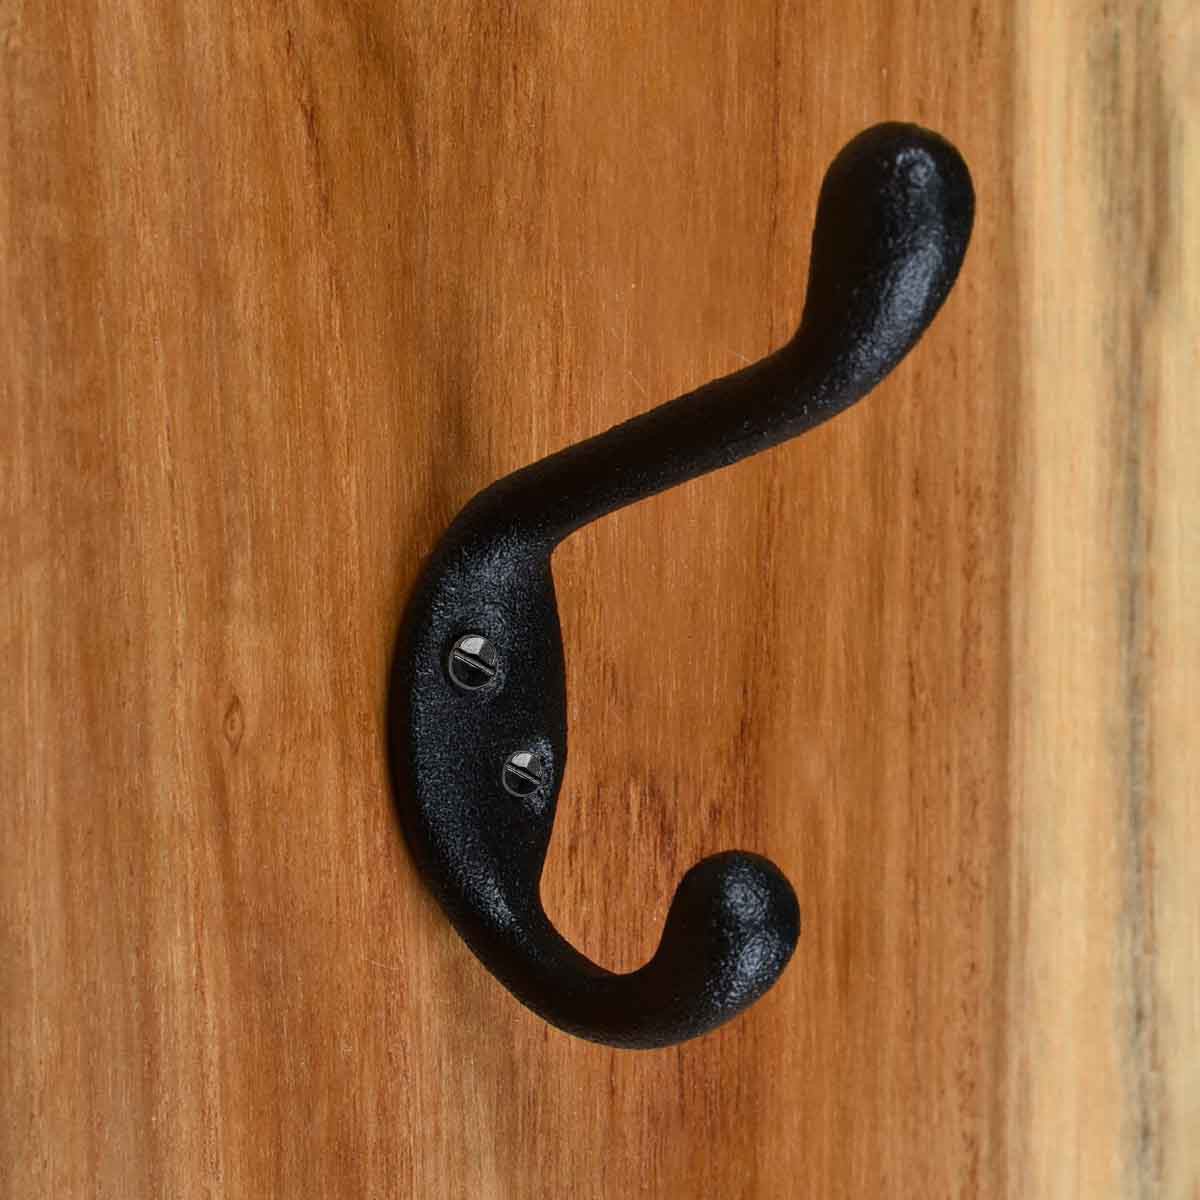 https://wroughtworks.com/images/wrought-iron/double-hook-black-wrought-iron-double-hook-3-in.jpg